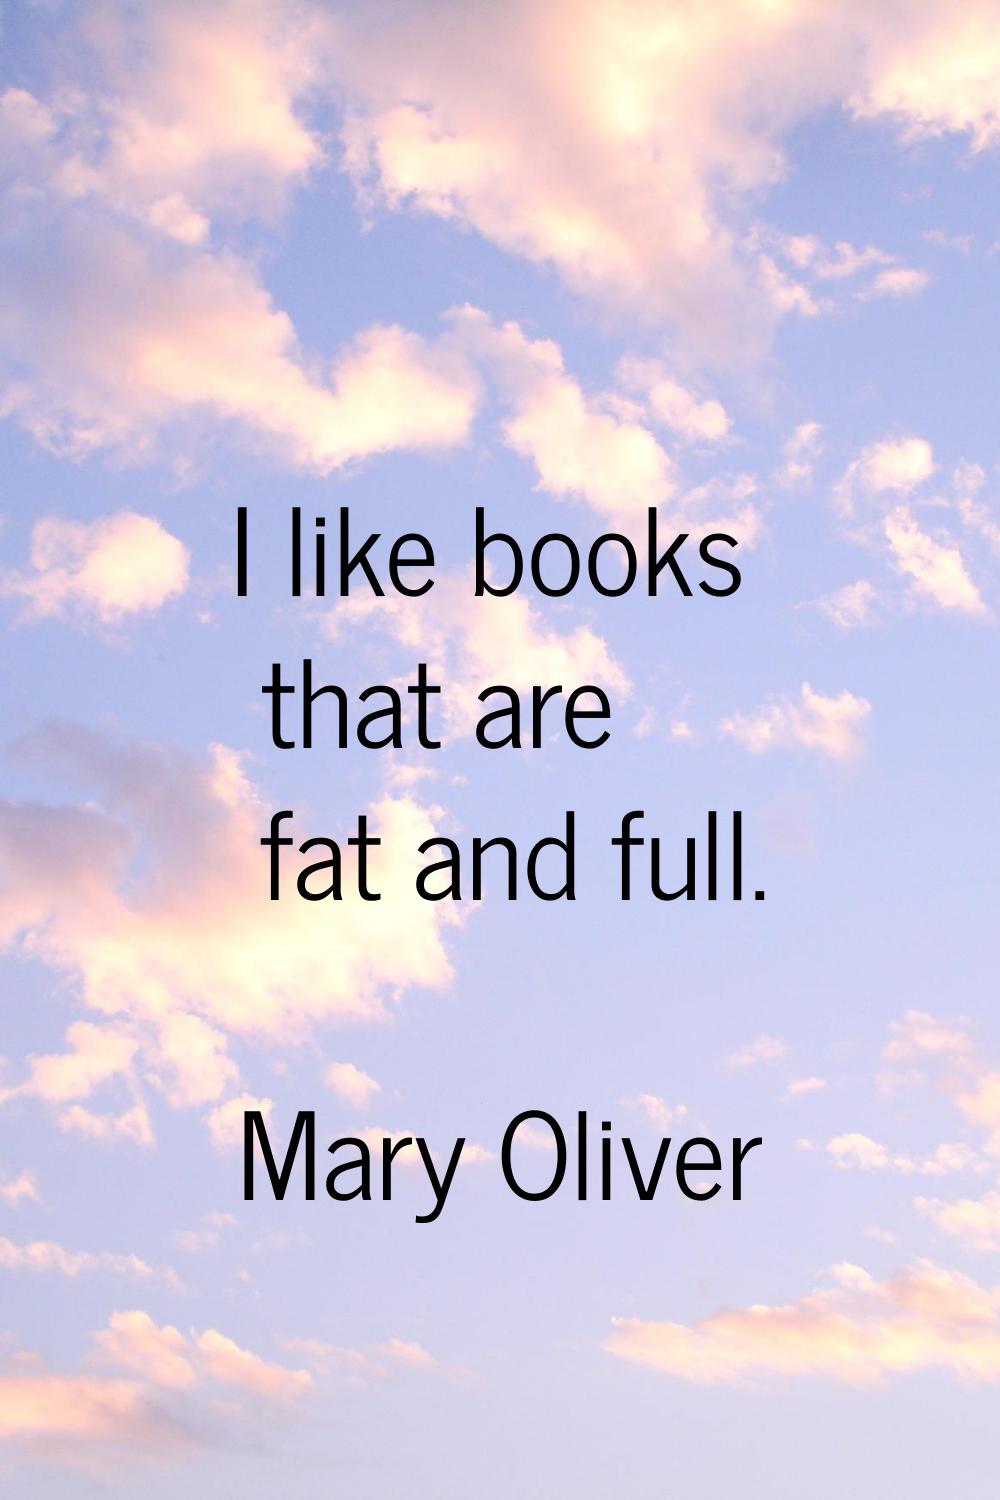 I like books that are fat and full.